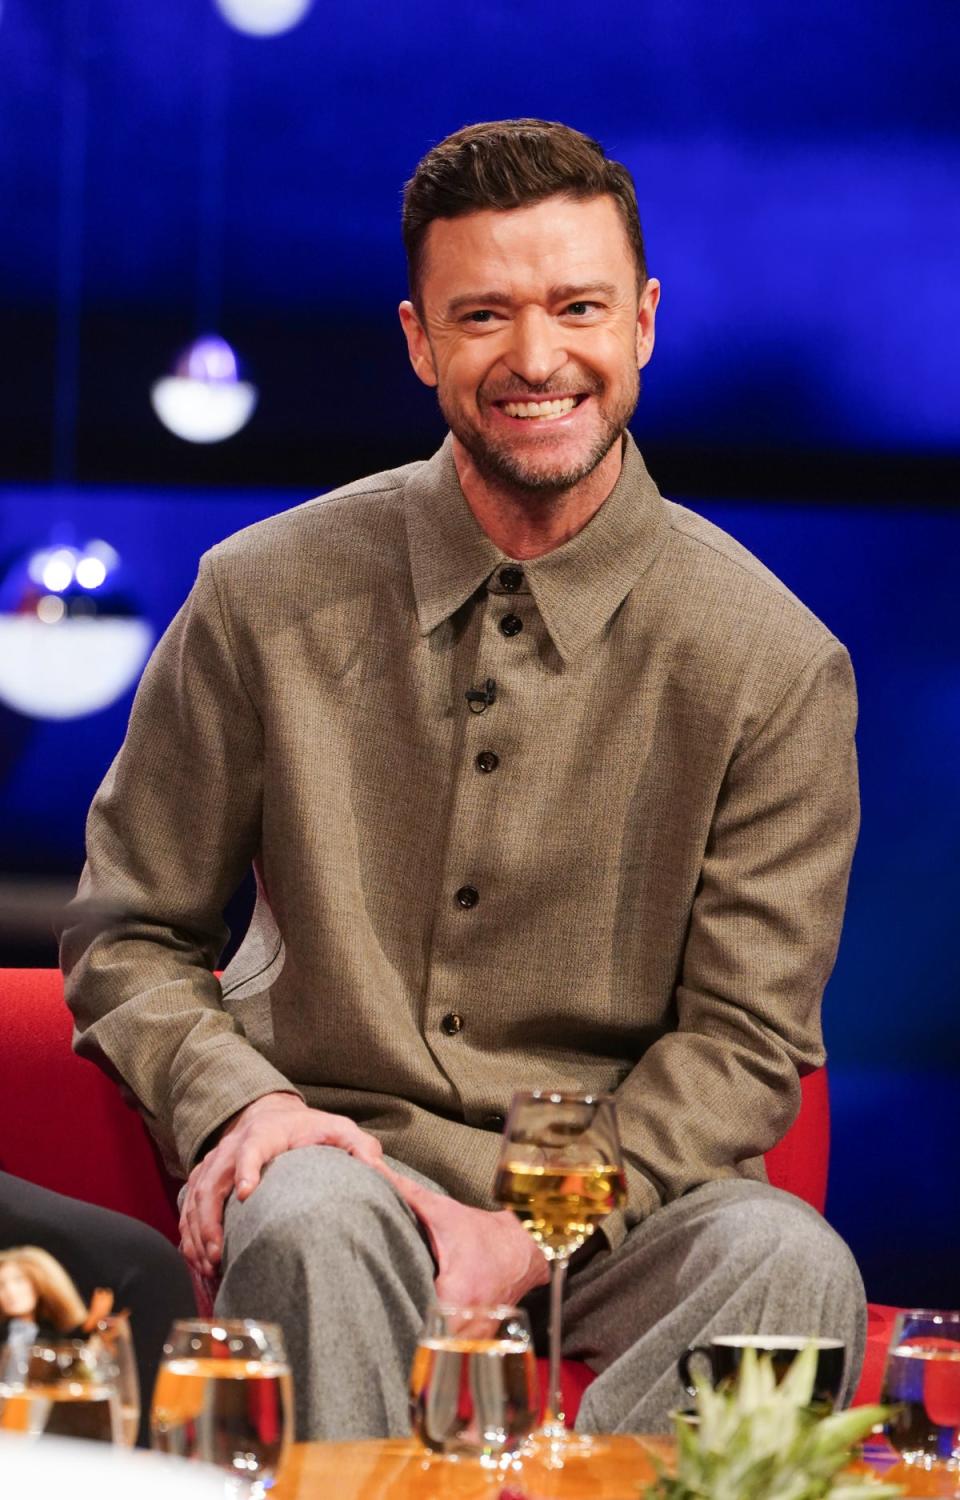 Justin Timberlake on ‘The Graham Norton’ show last week (Ian West/PA Wire)